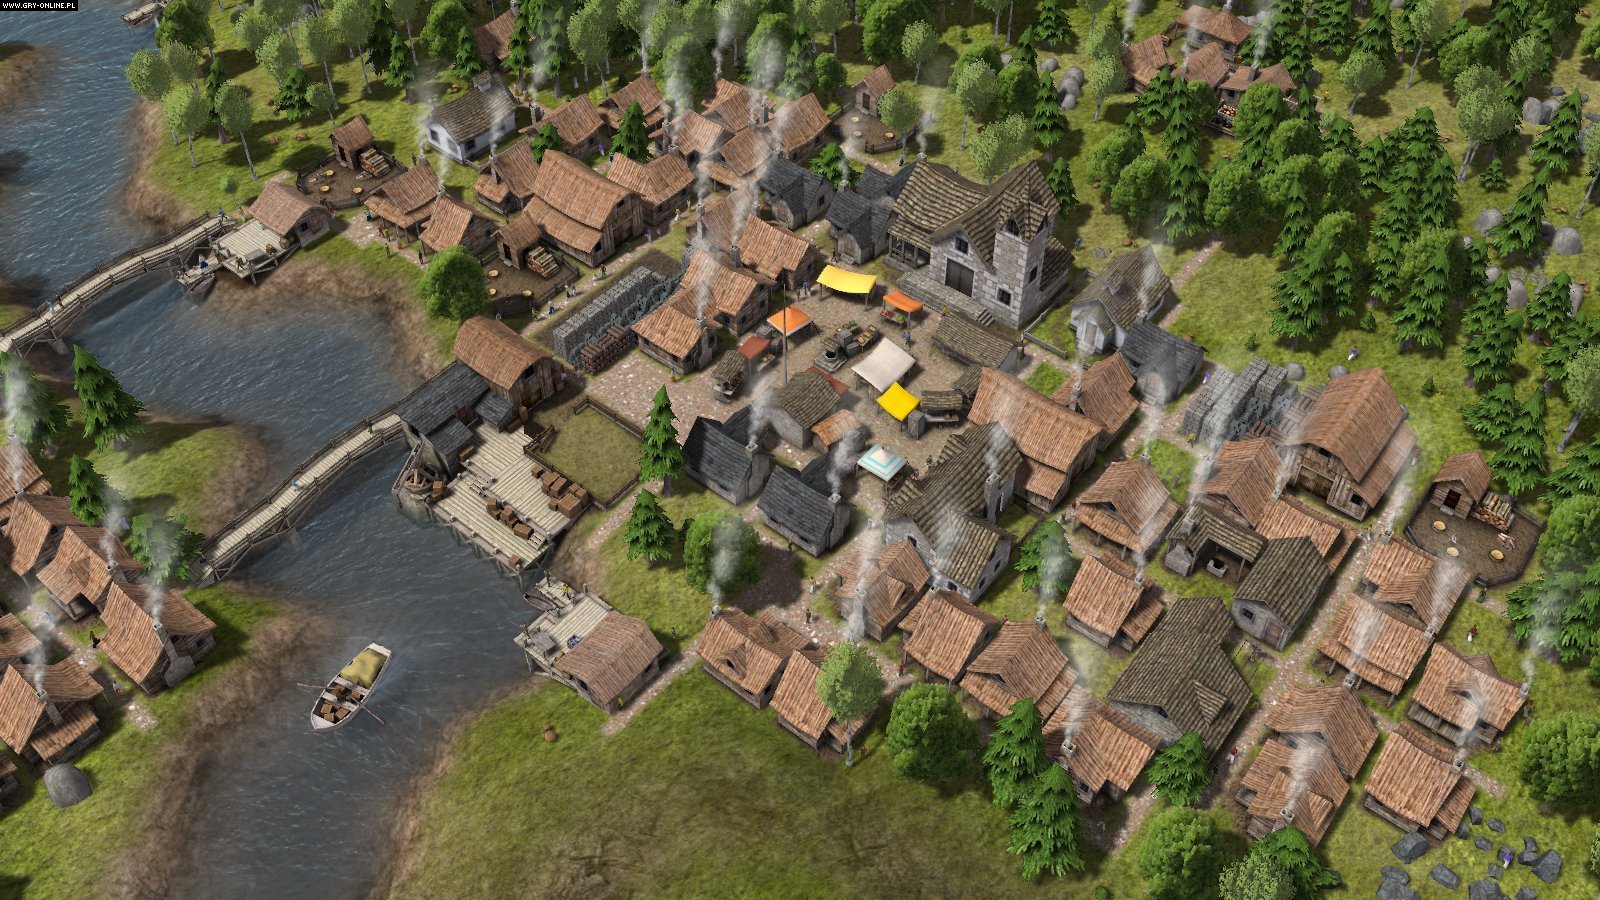 banished pc game release date